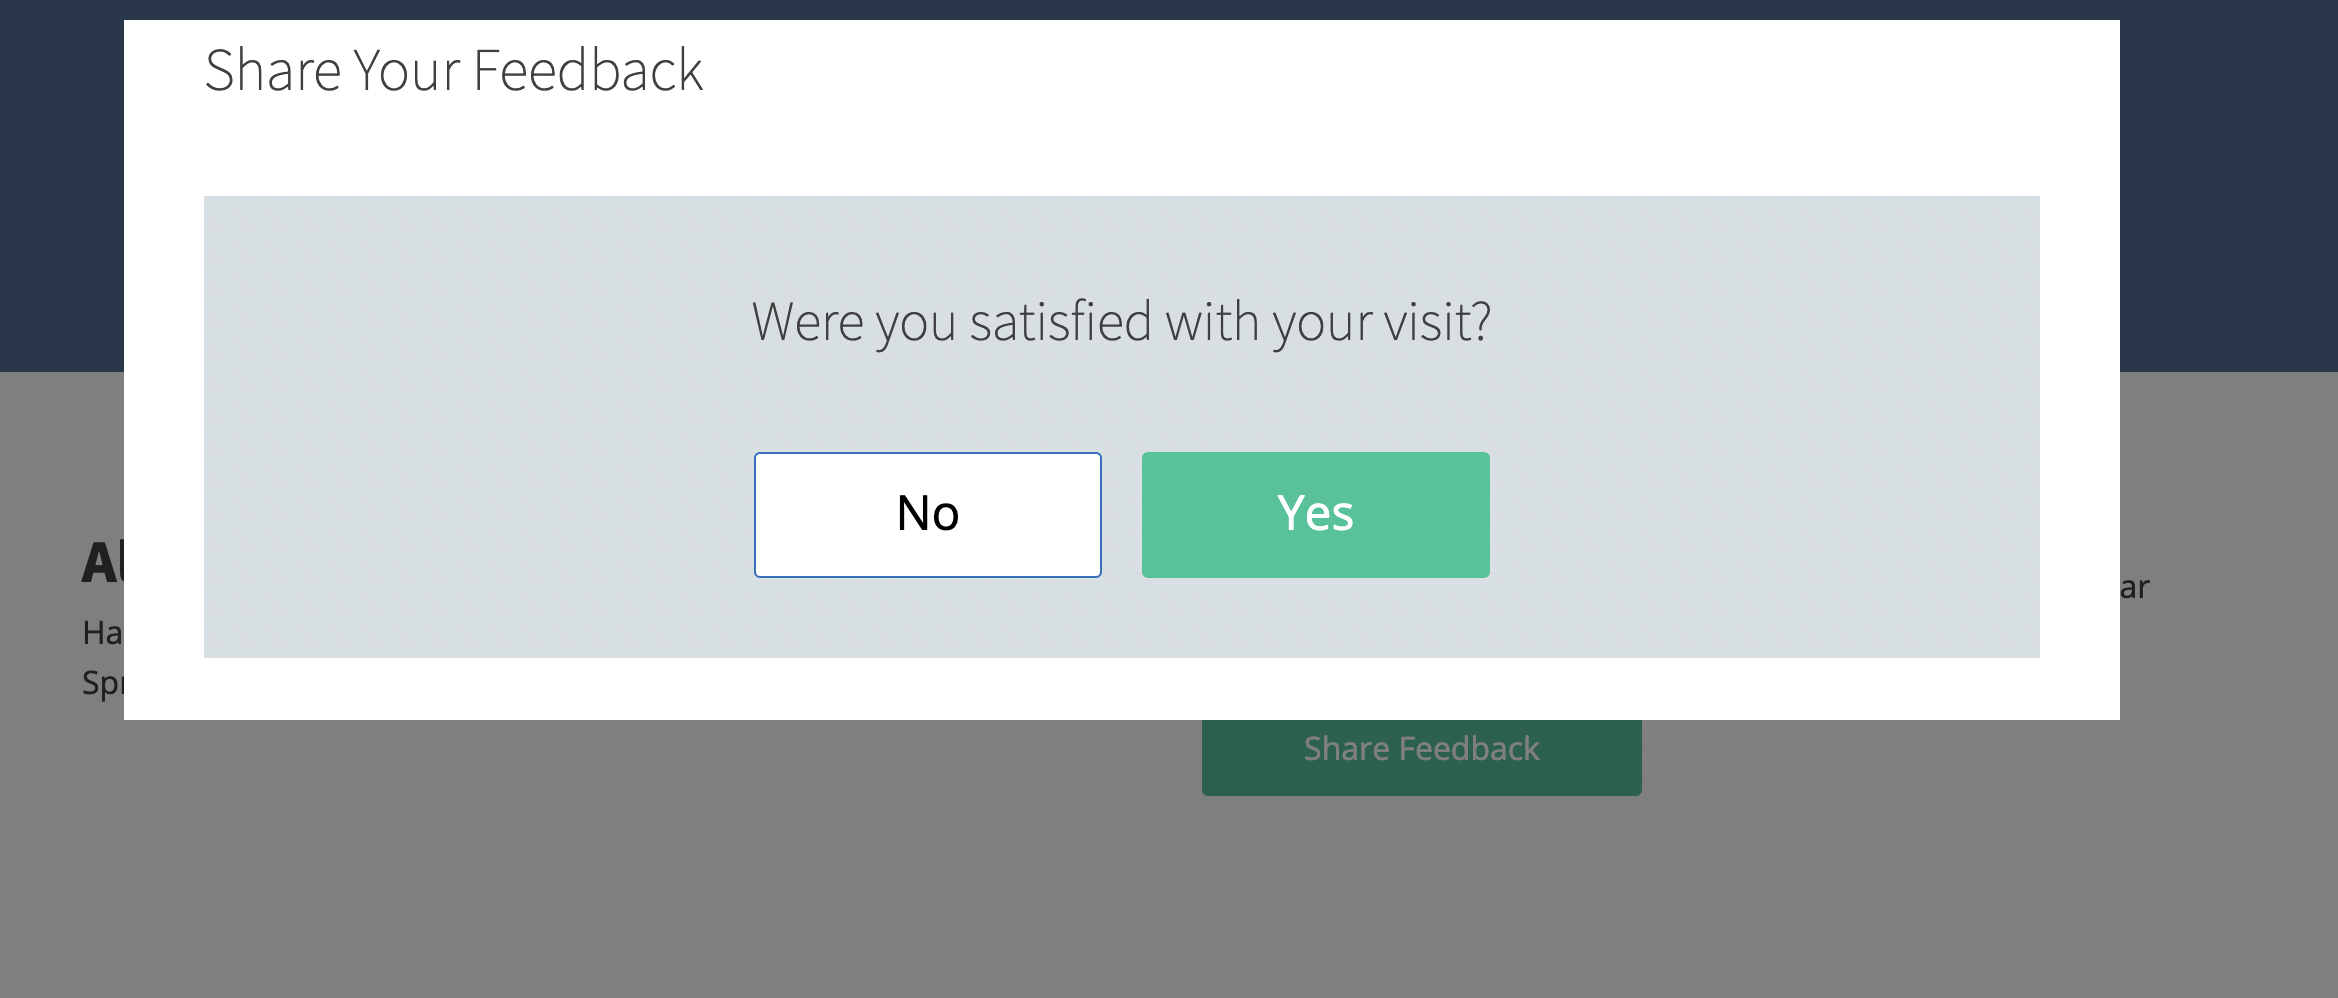 Share Patient Feedback Modal